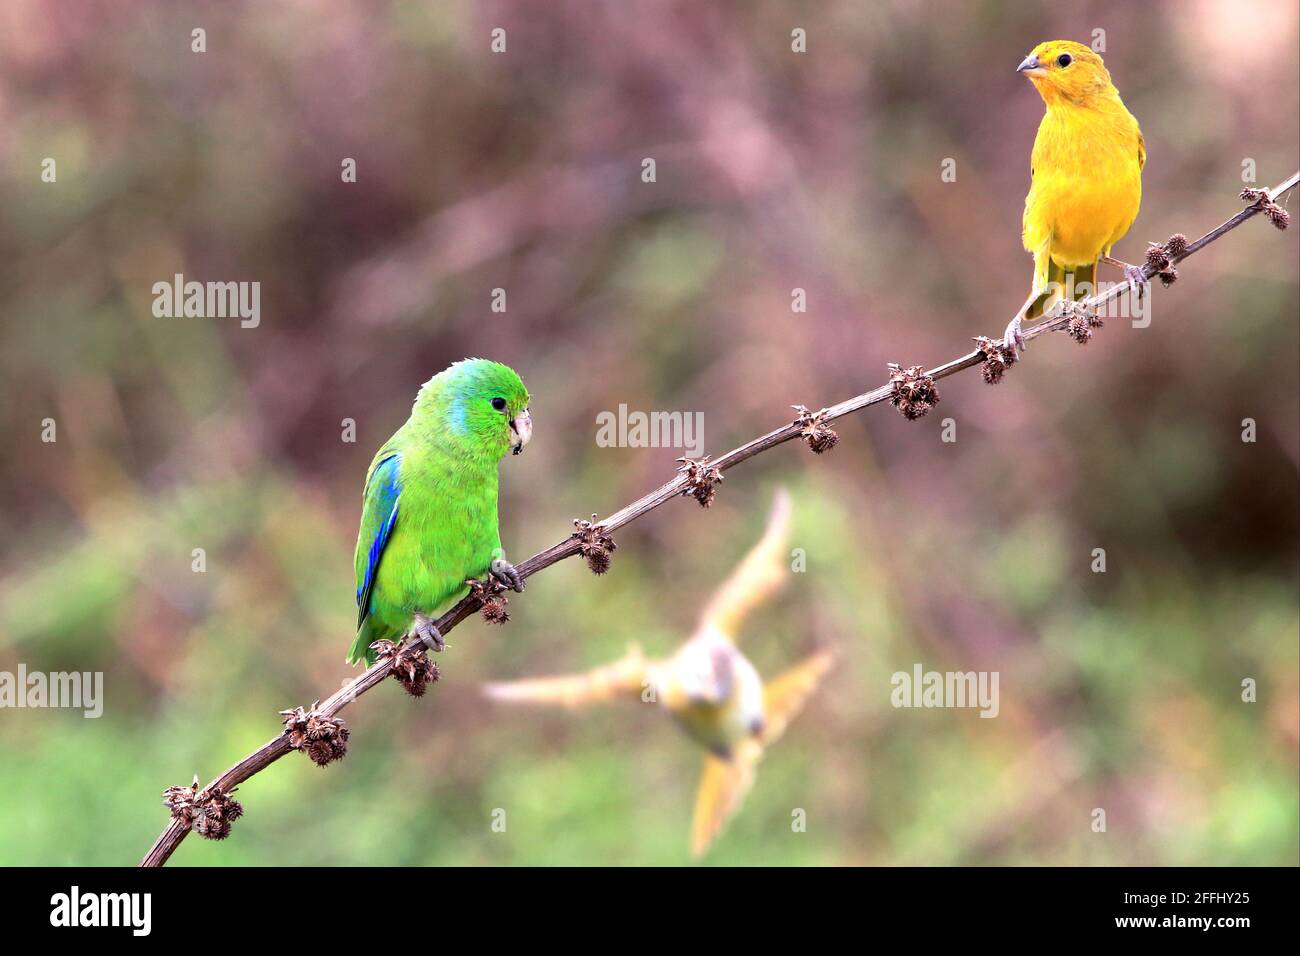 photo of a green bird (Blue-winged Parrotlet - Forpus xanthopterygius) and another yellow bird (Saffron Finch - Sicalis flaveola) perched on the same Stock Photo